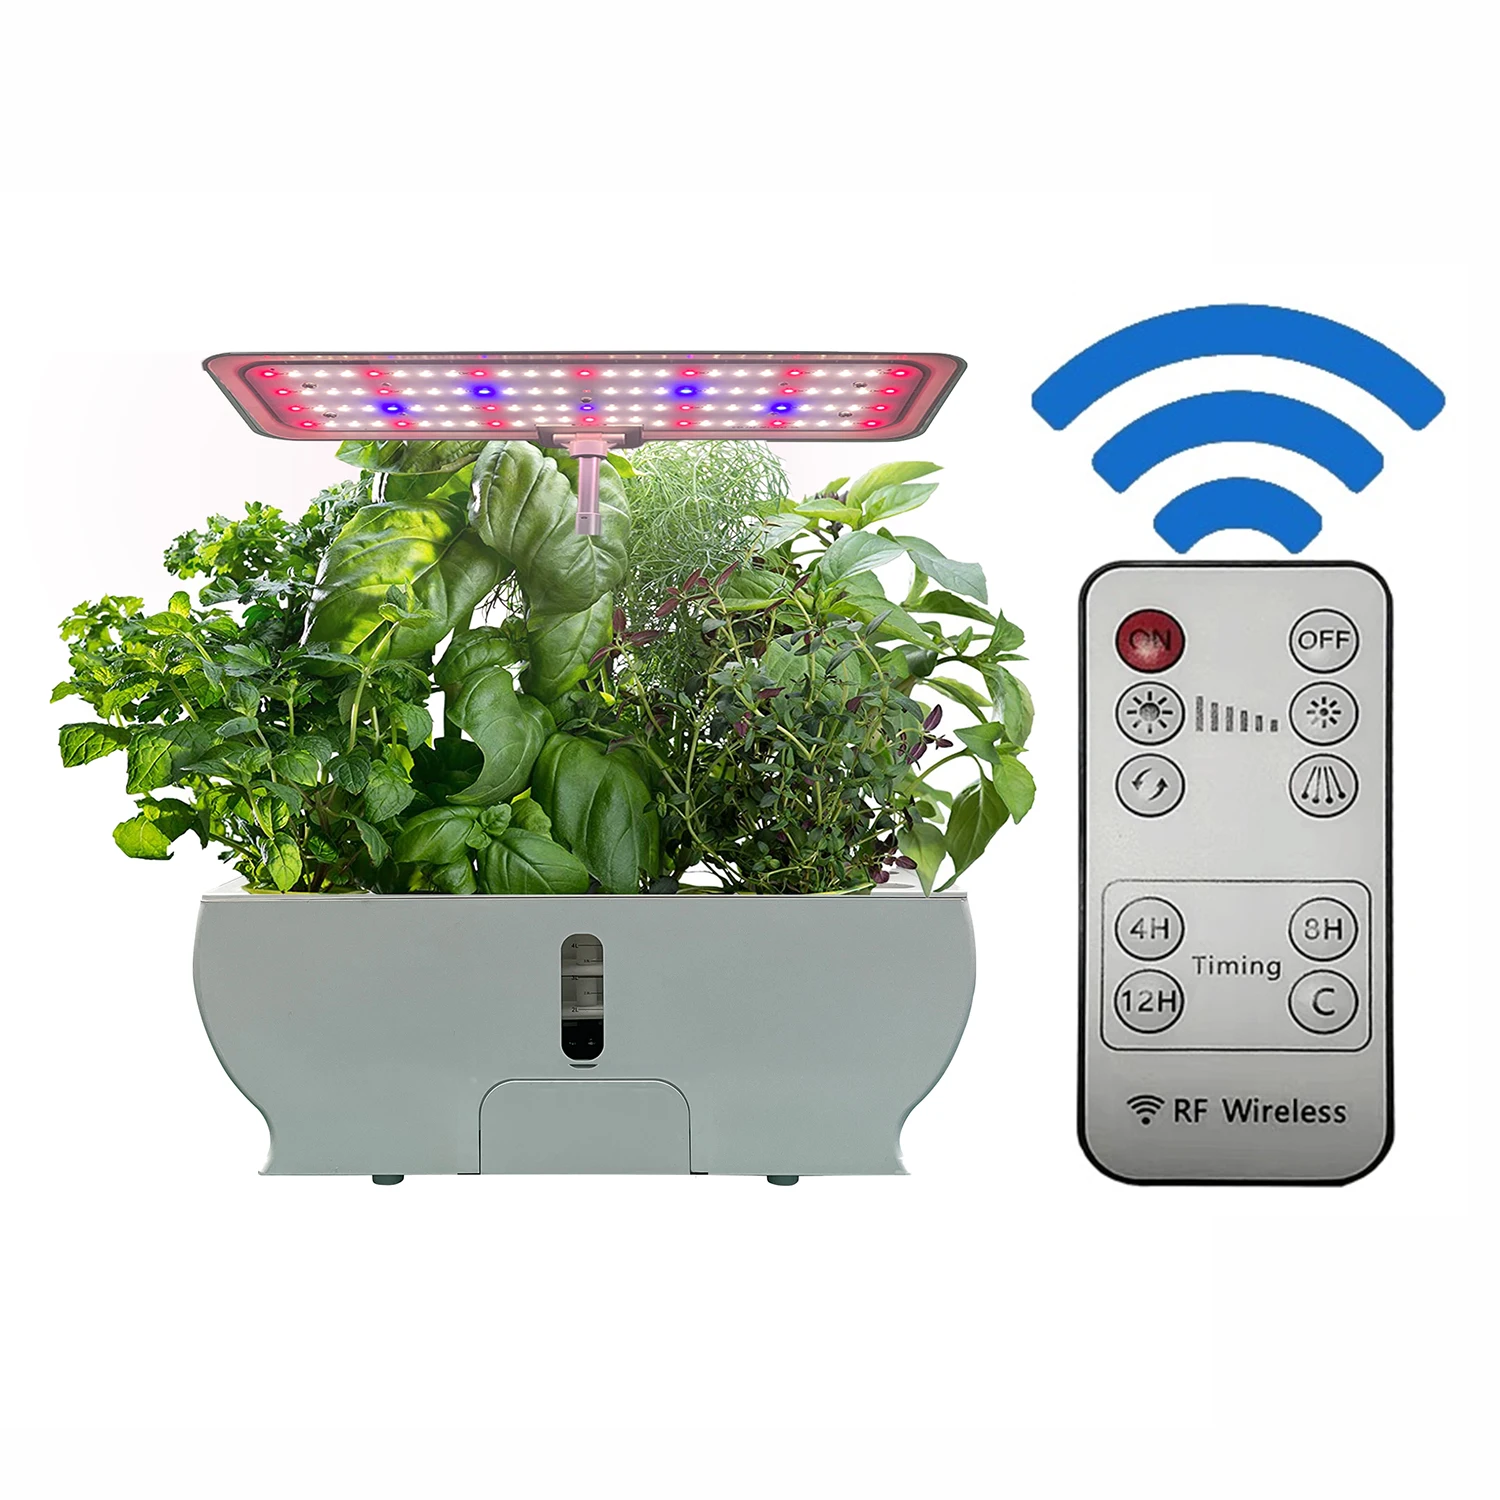 

Self Watering Planter Click and Grow Smart Mini Garden Hydroponic Indoor Automatic Herb Vegetable Self Growing Machine with Led